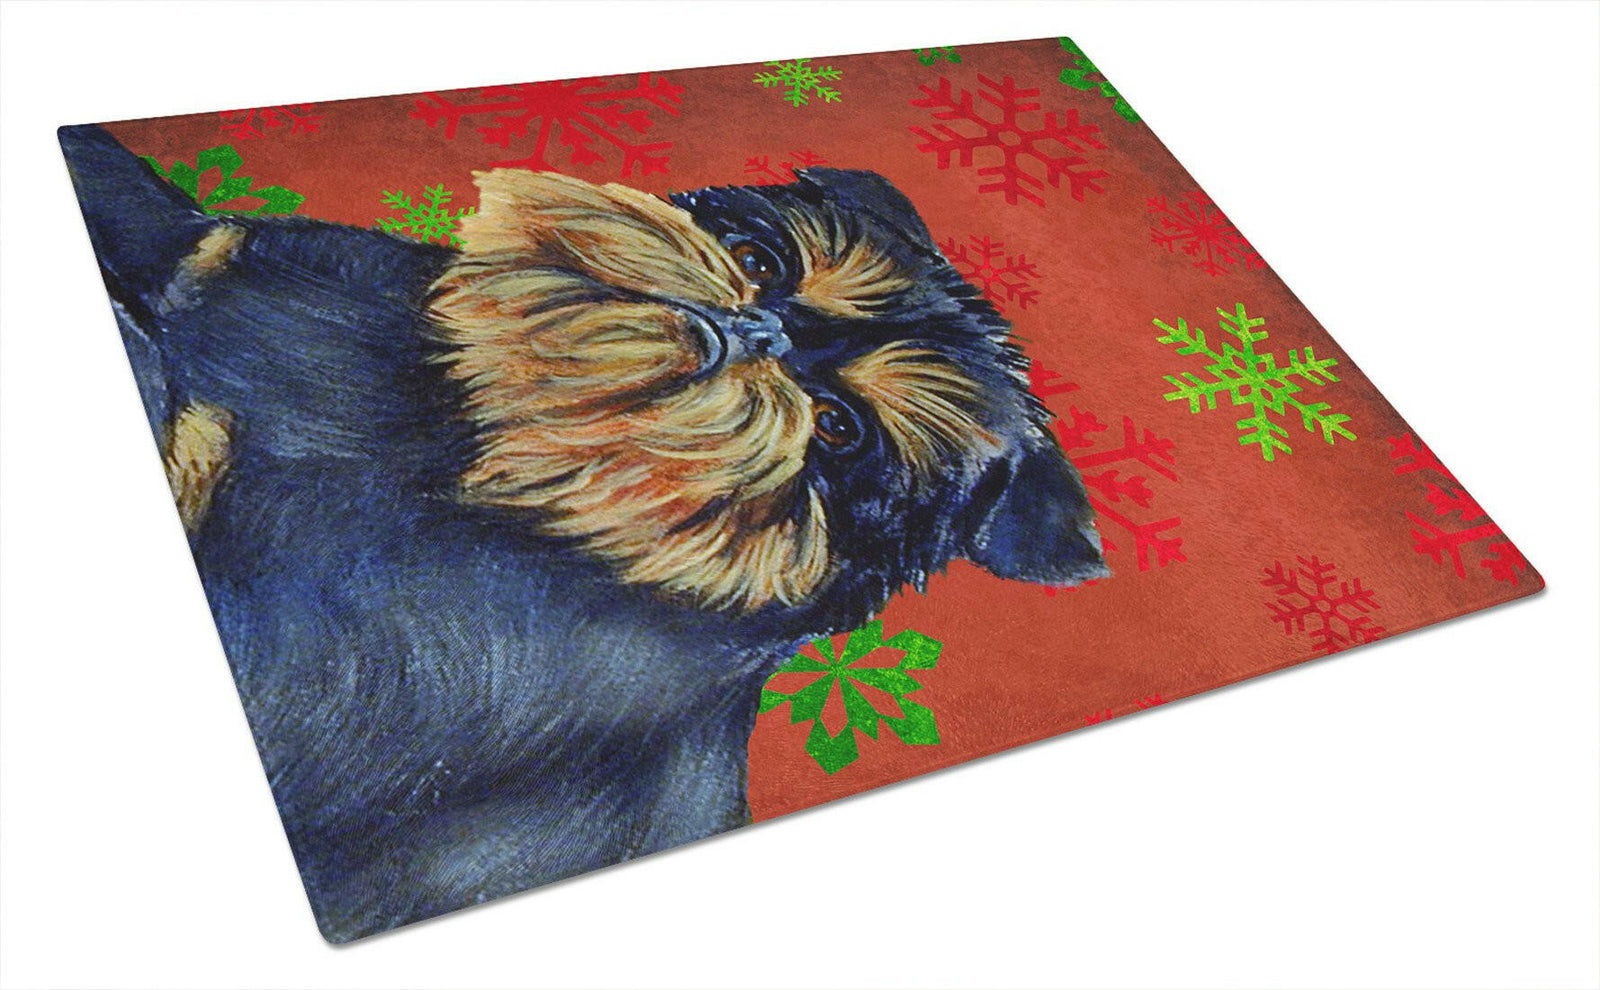 Brussels Griffon Red and Green Snowflakes Christmas Glass Cutting Board Large by Caroline's Treasures